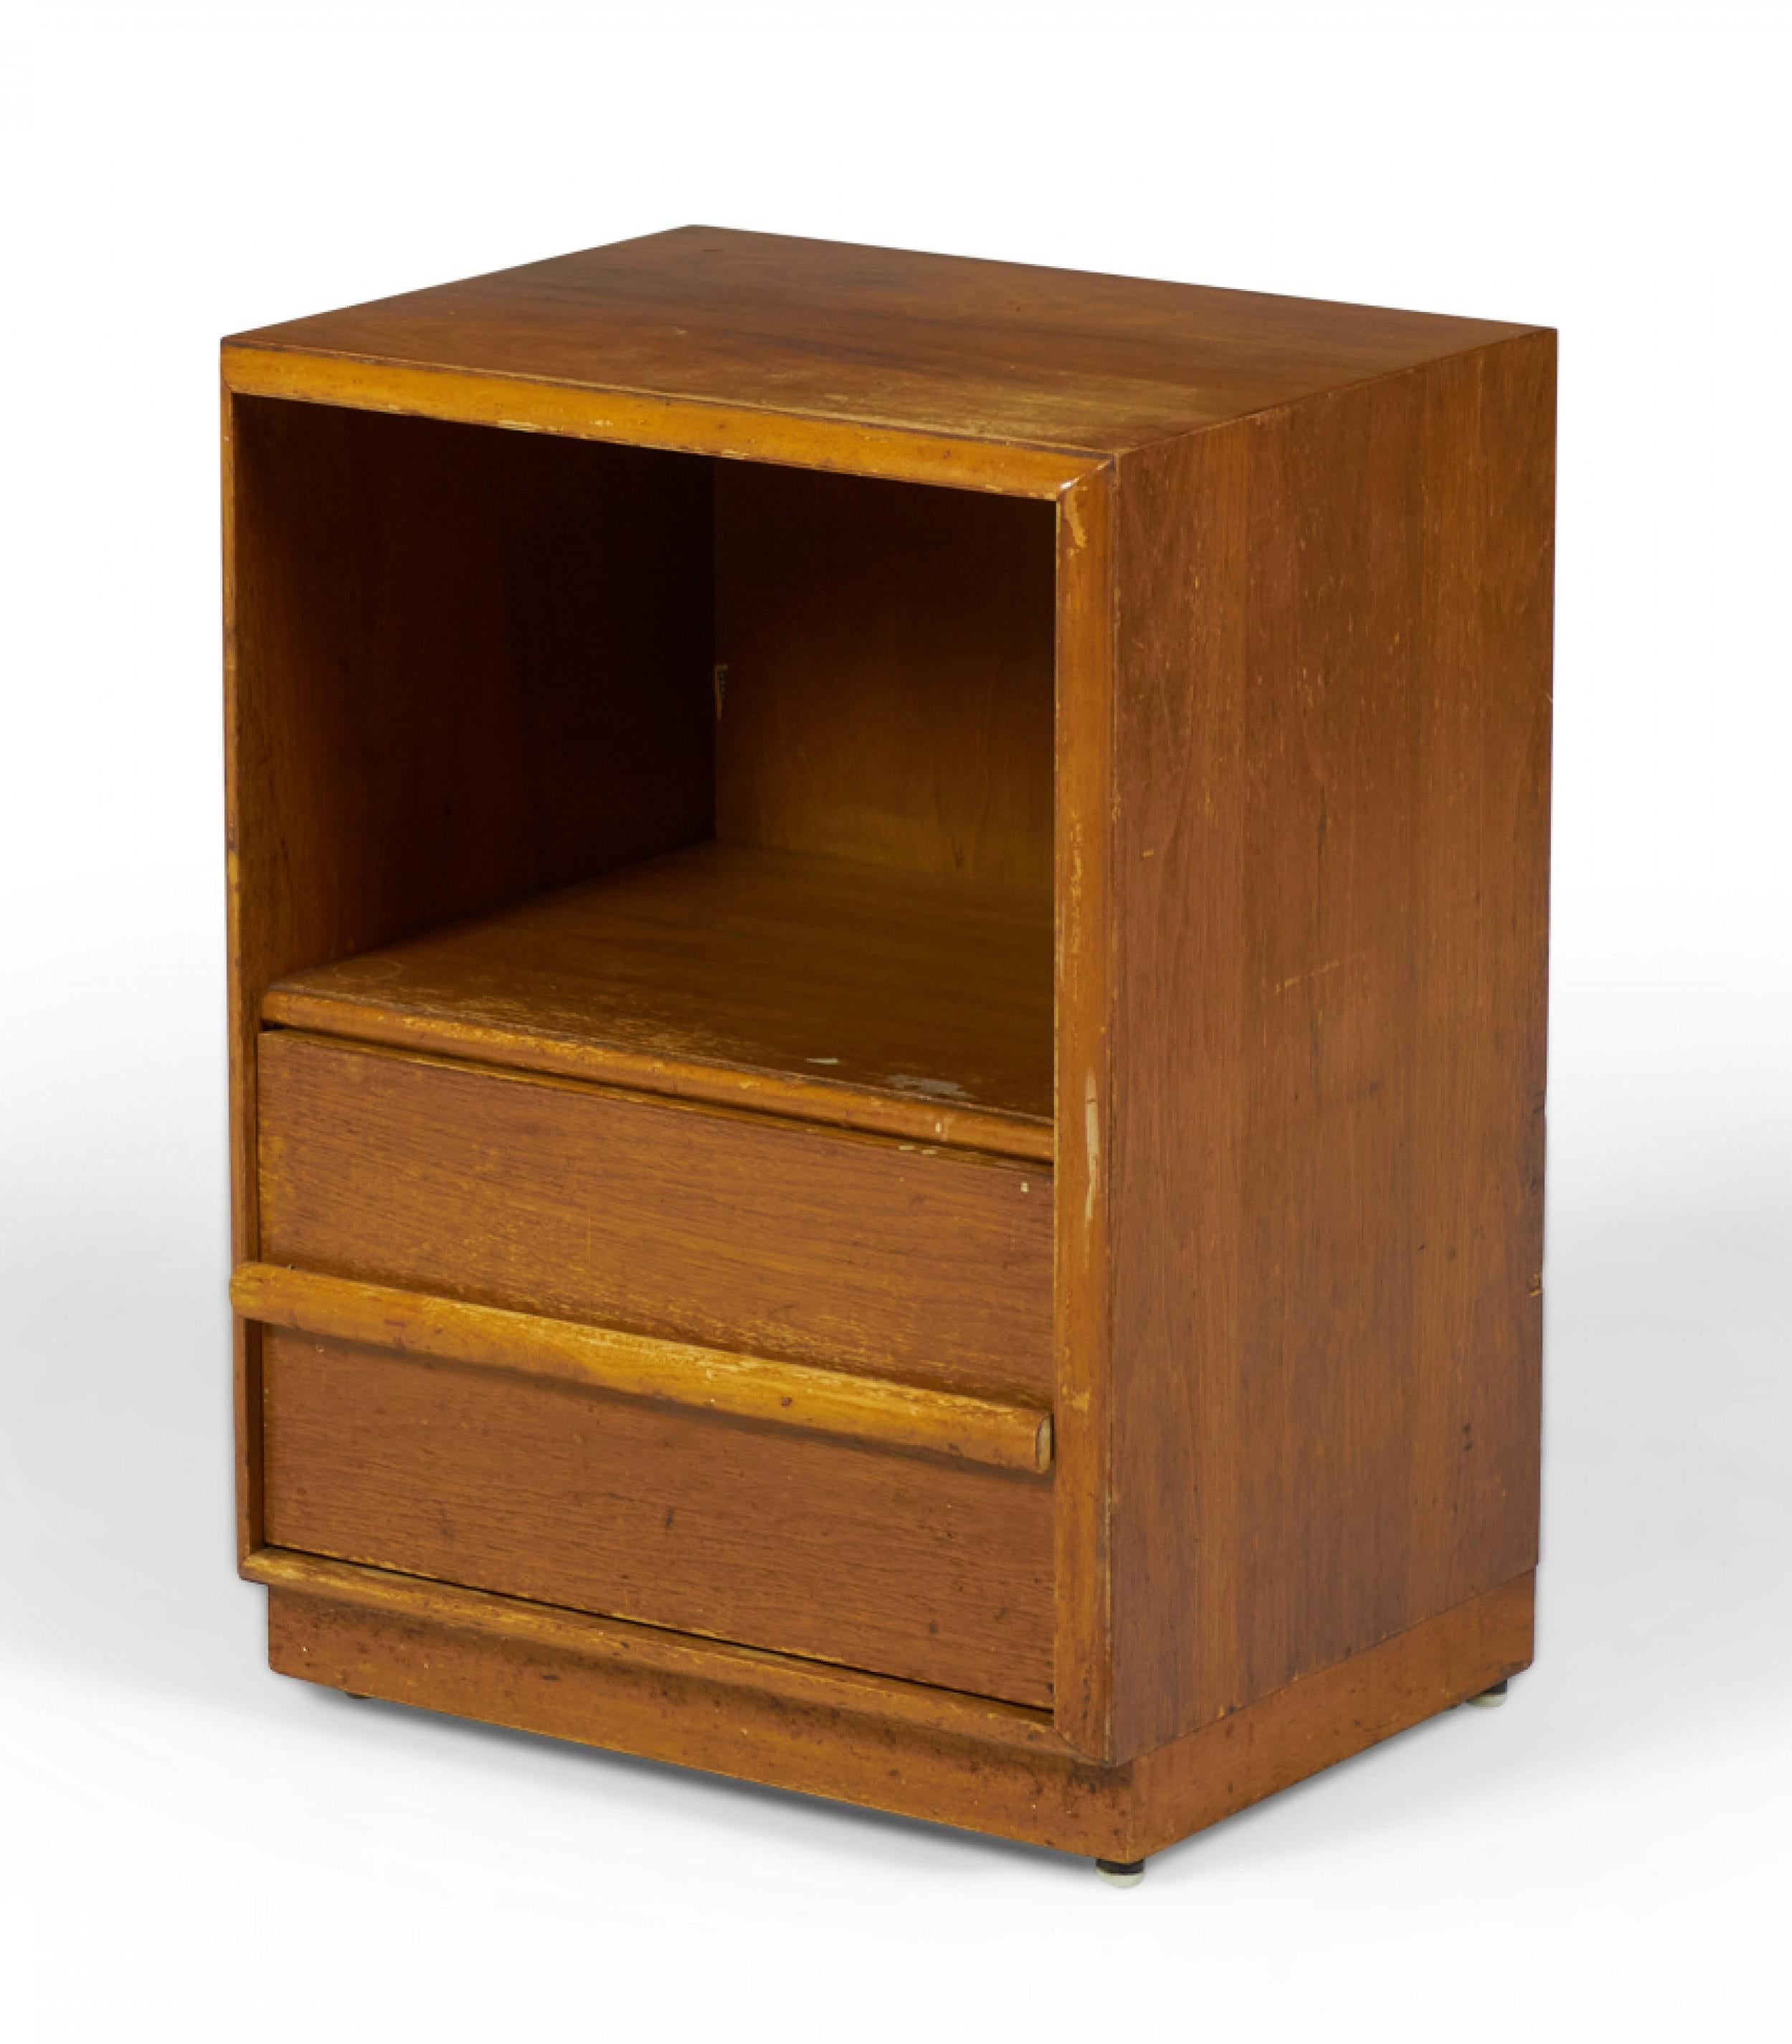 American Mid-Century walnut nightstand with an open upper cabinet shelf and a single lower drawer with a horizontal raised wooden drawer pull. (T.H. ROBSJOHN-GIBBINGS FOR WIDDICOMB)(Same piece with different finish: DUF0143B-C).